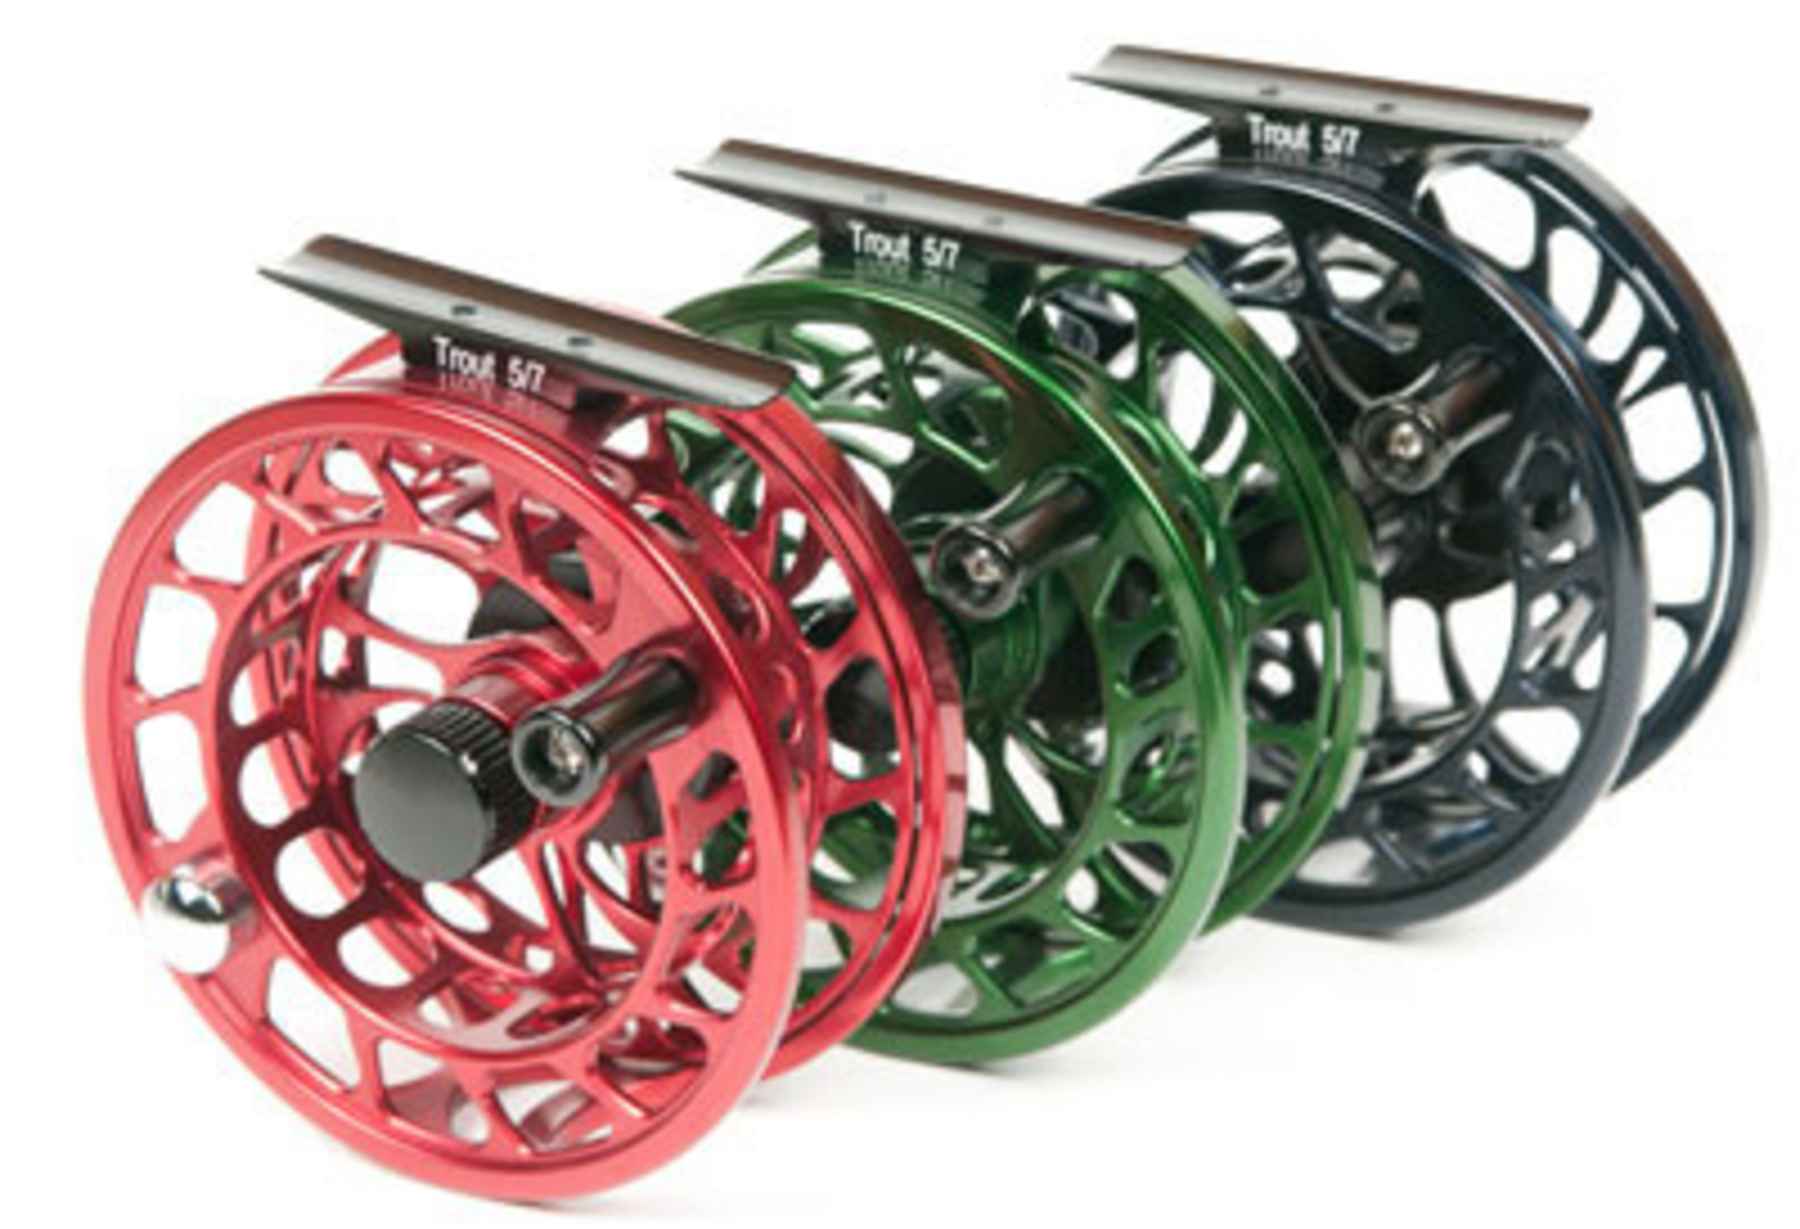 Allen Fly Fishing Trout 2 Reel Review 